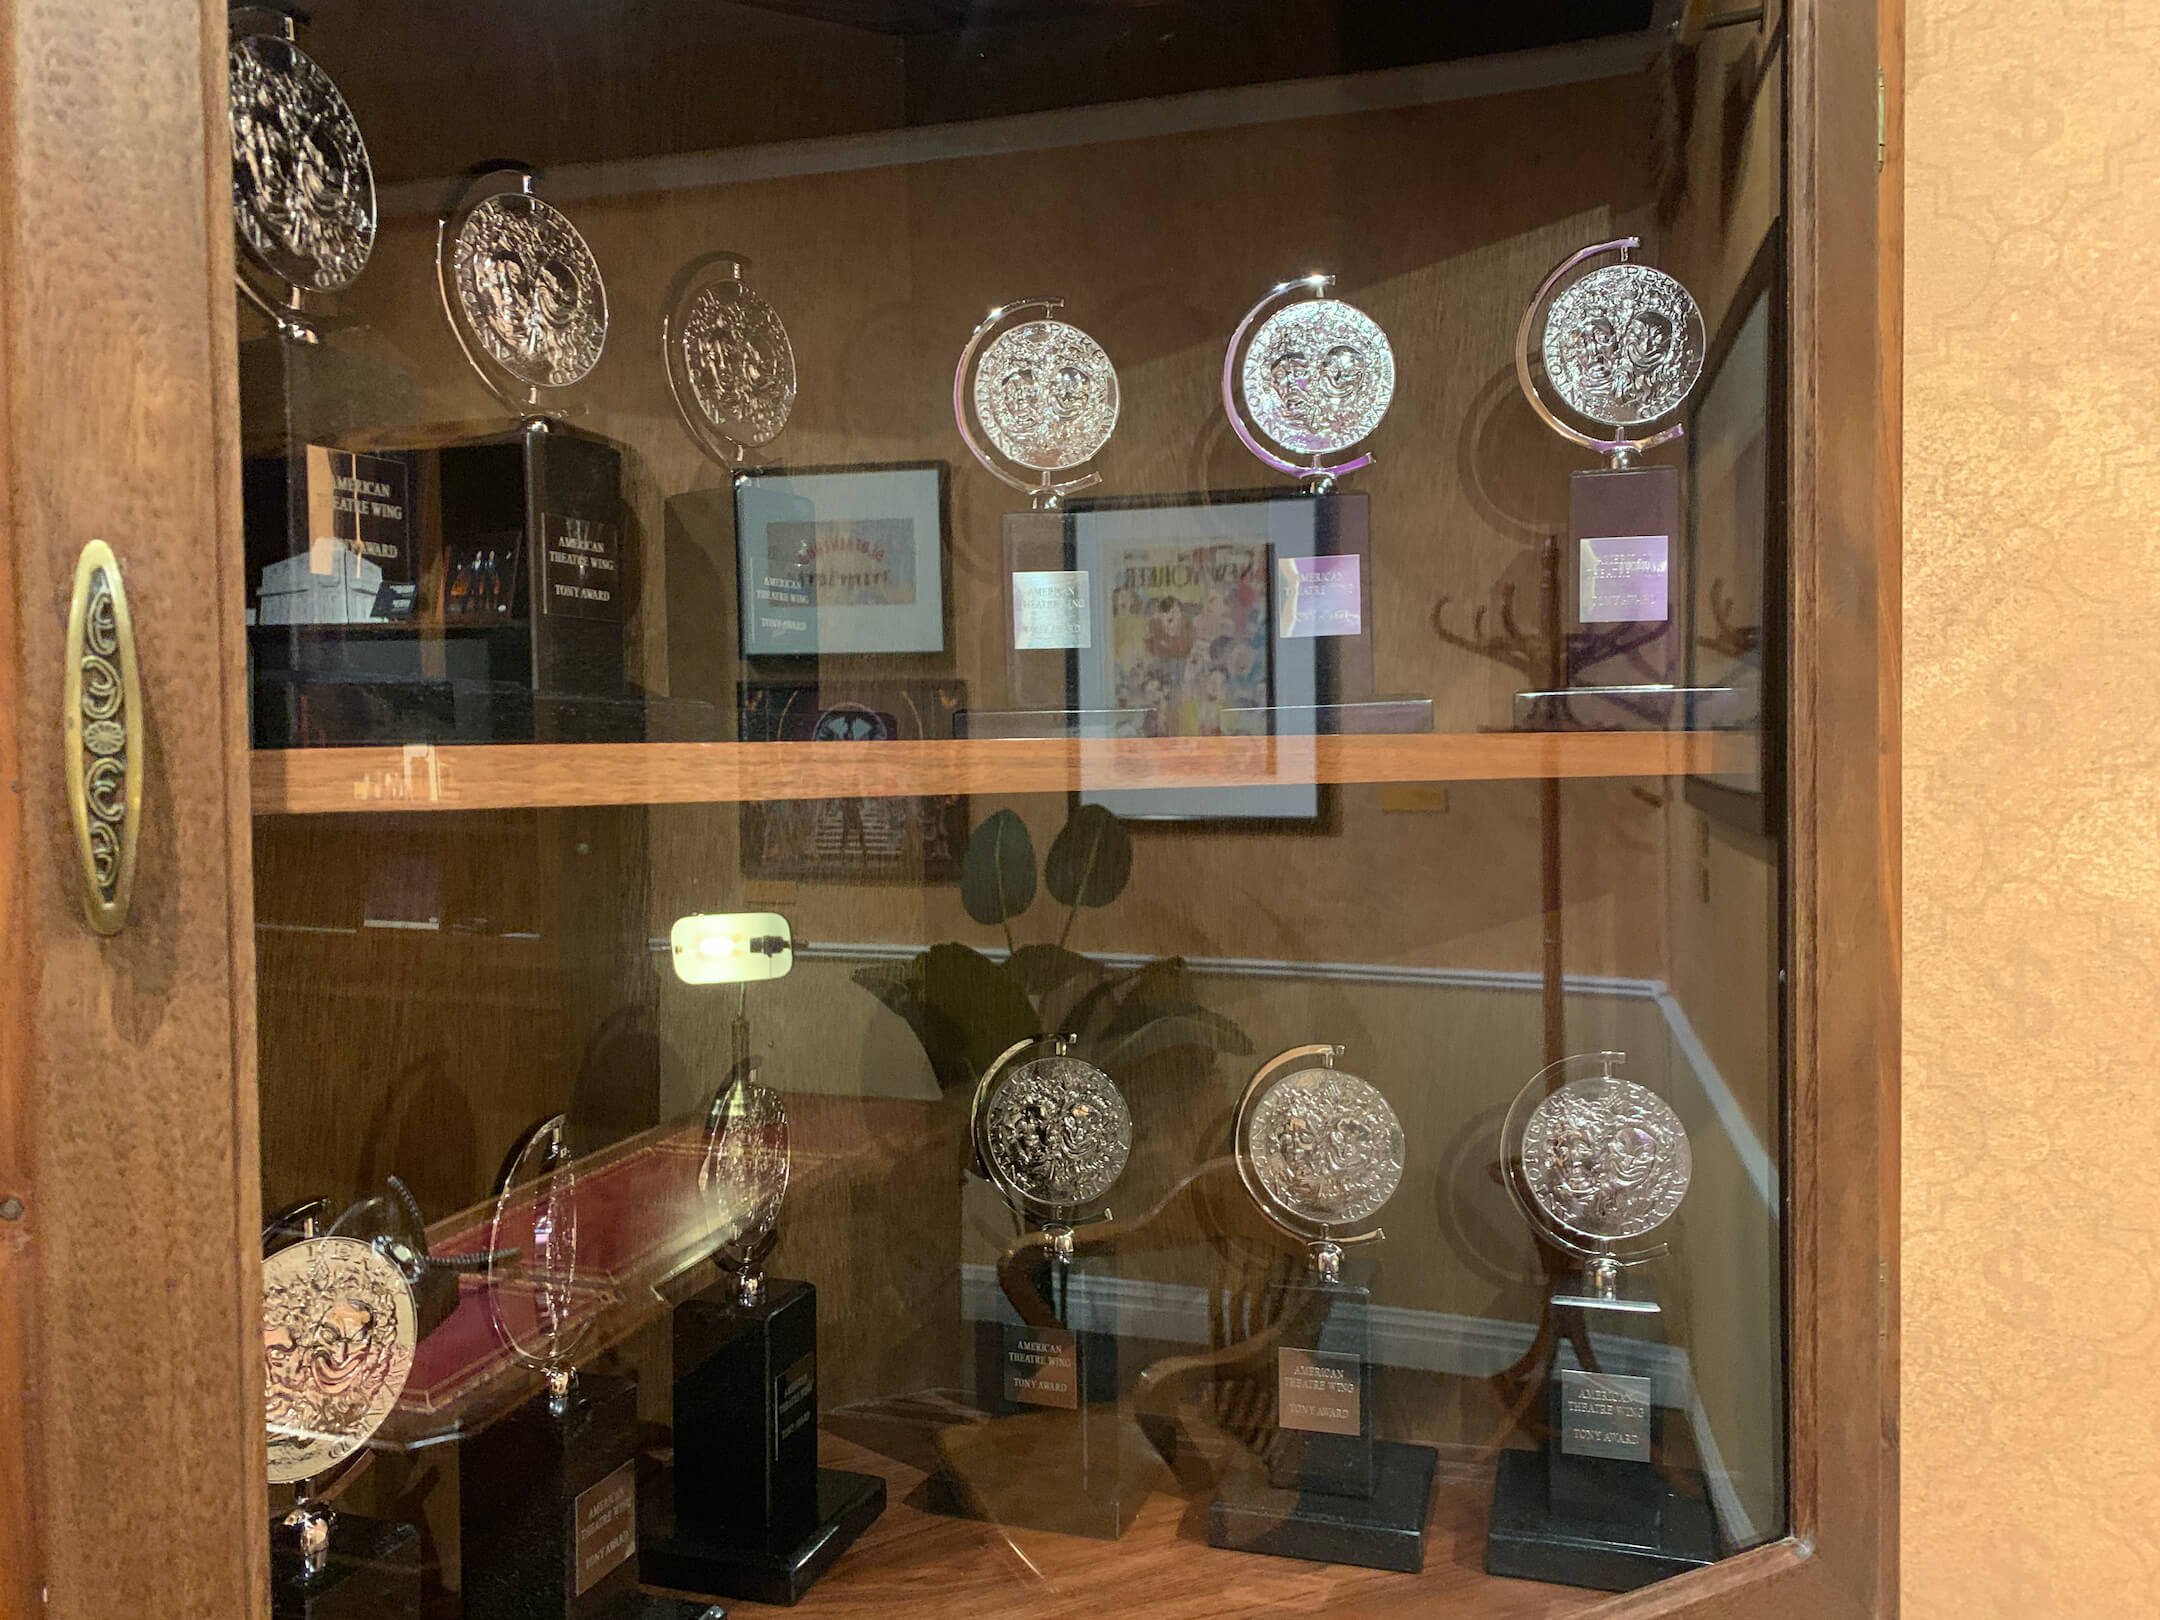   The Producers  won 12 Tony Awards in 2001. The awards are on display as part of a recreation of  The Producers  set. 